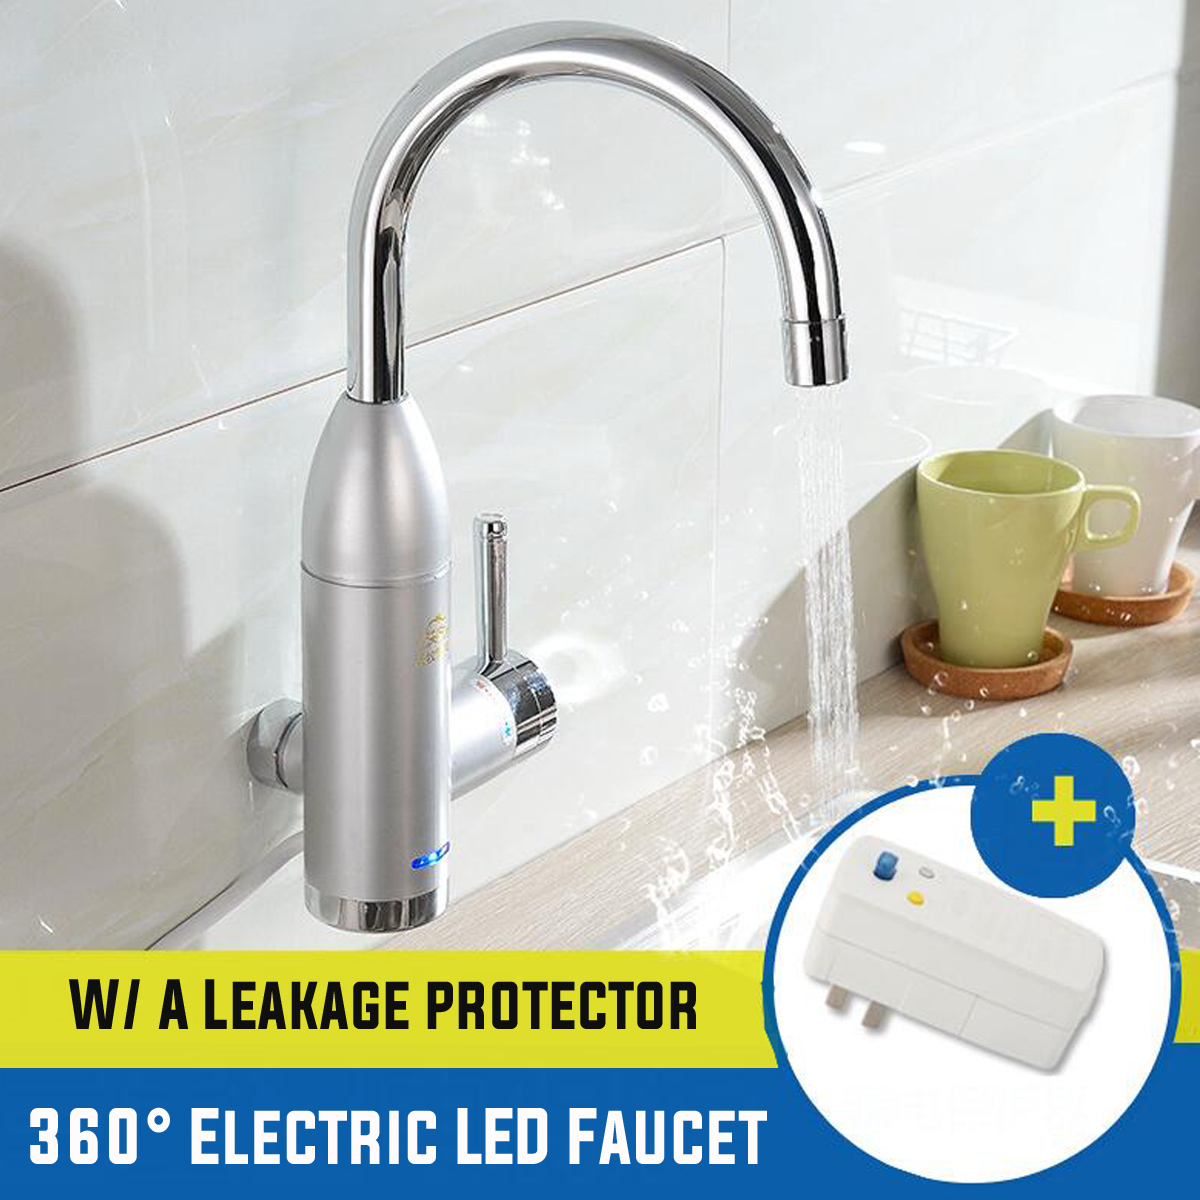 220V-3000W-360deg-LED-Electric-Instant-Heater-Faucet-Home-Kitchen-Bathroom-Hot-amp-Cold-Mixer-Tap-1420294